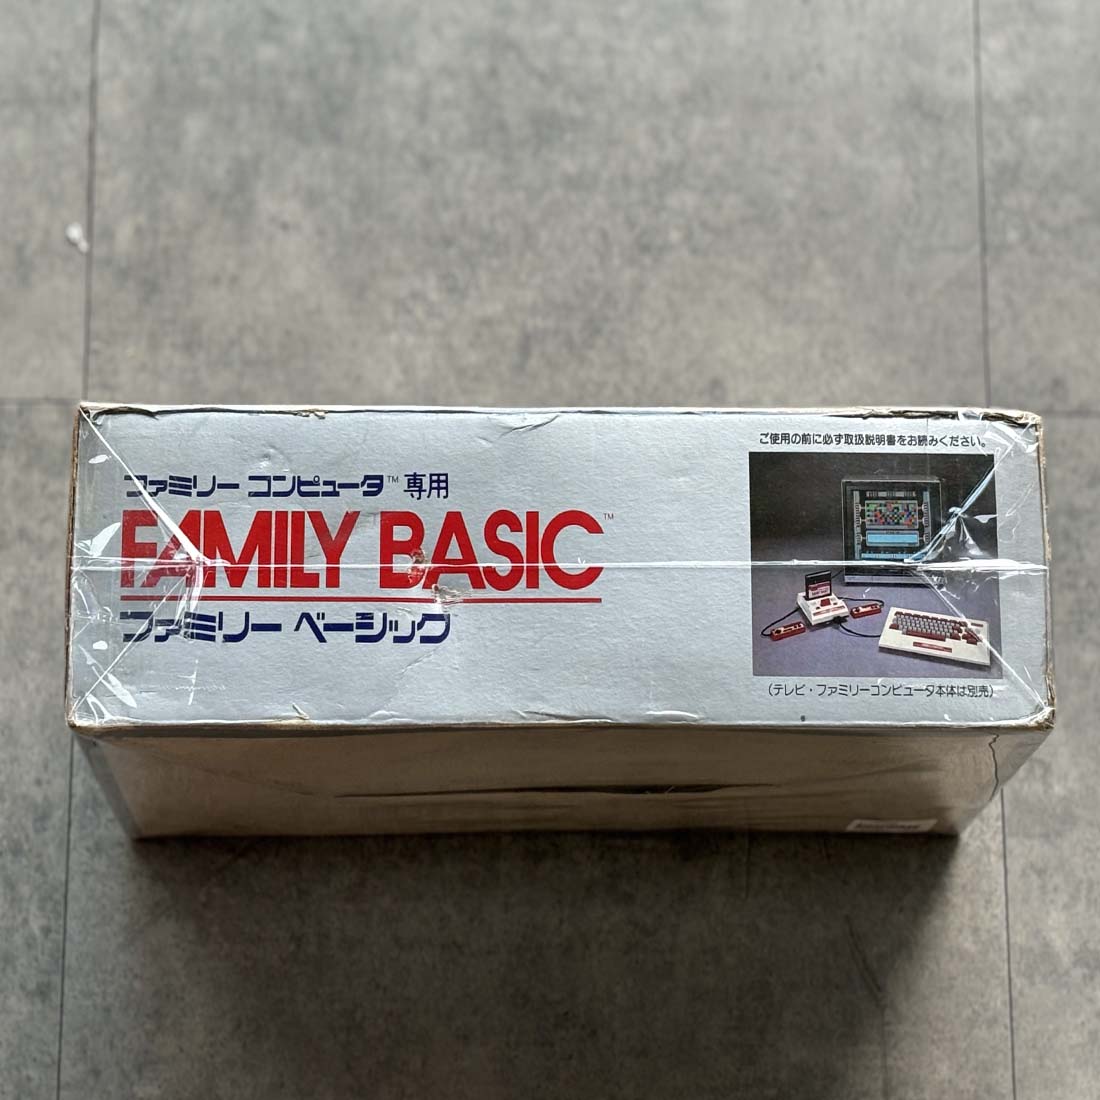 (Pre-Owned) Family computer Family basic Keyboard - لوحة مفاتيح - Store 974 | ستور ٩٧٤